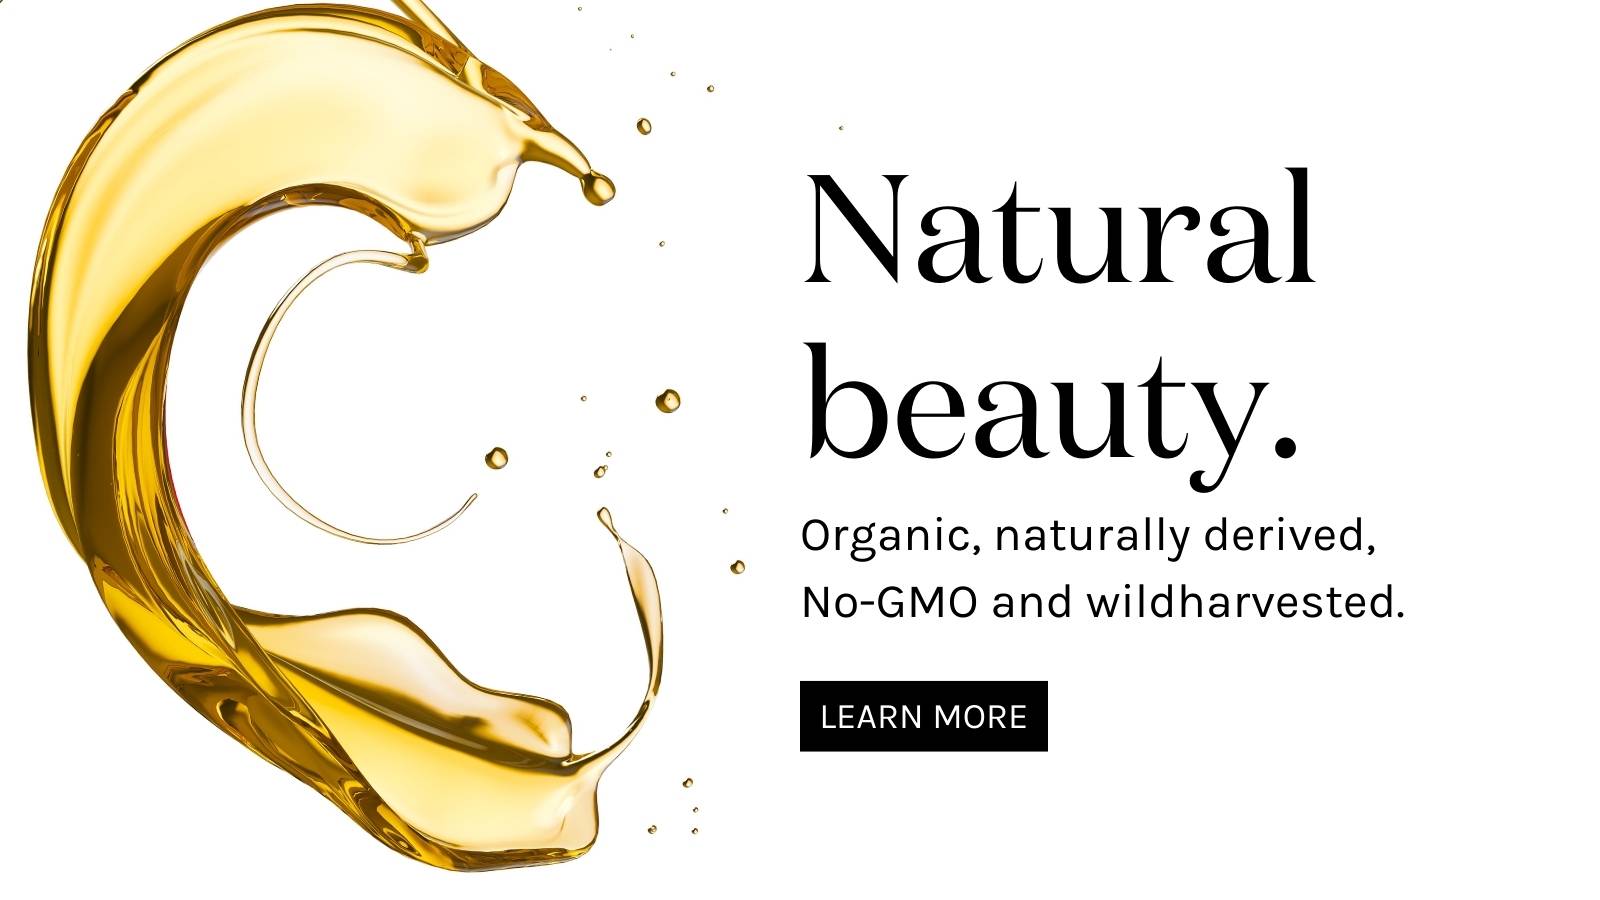 Natural beauty. Organic, naturally-derived, Non-GMO and wildharvested